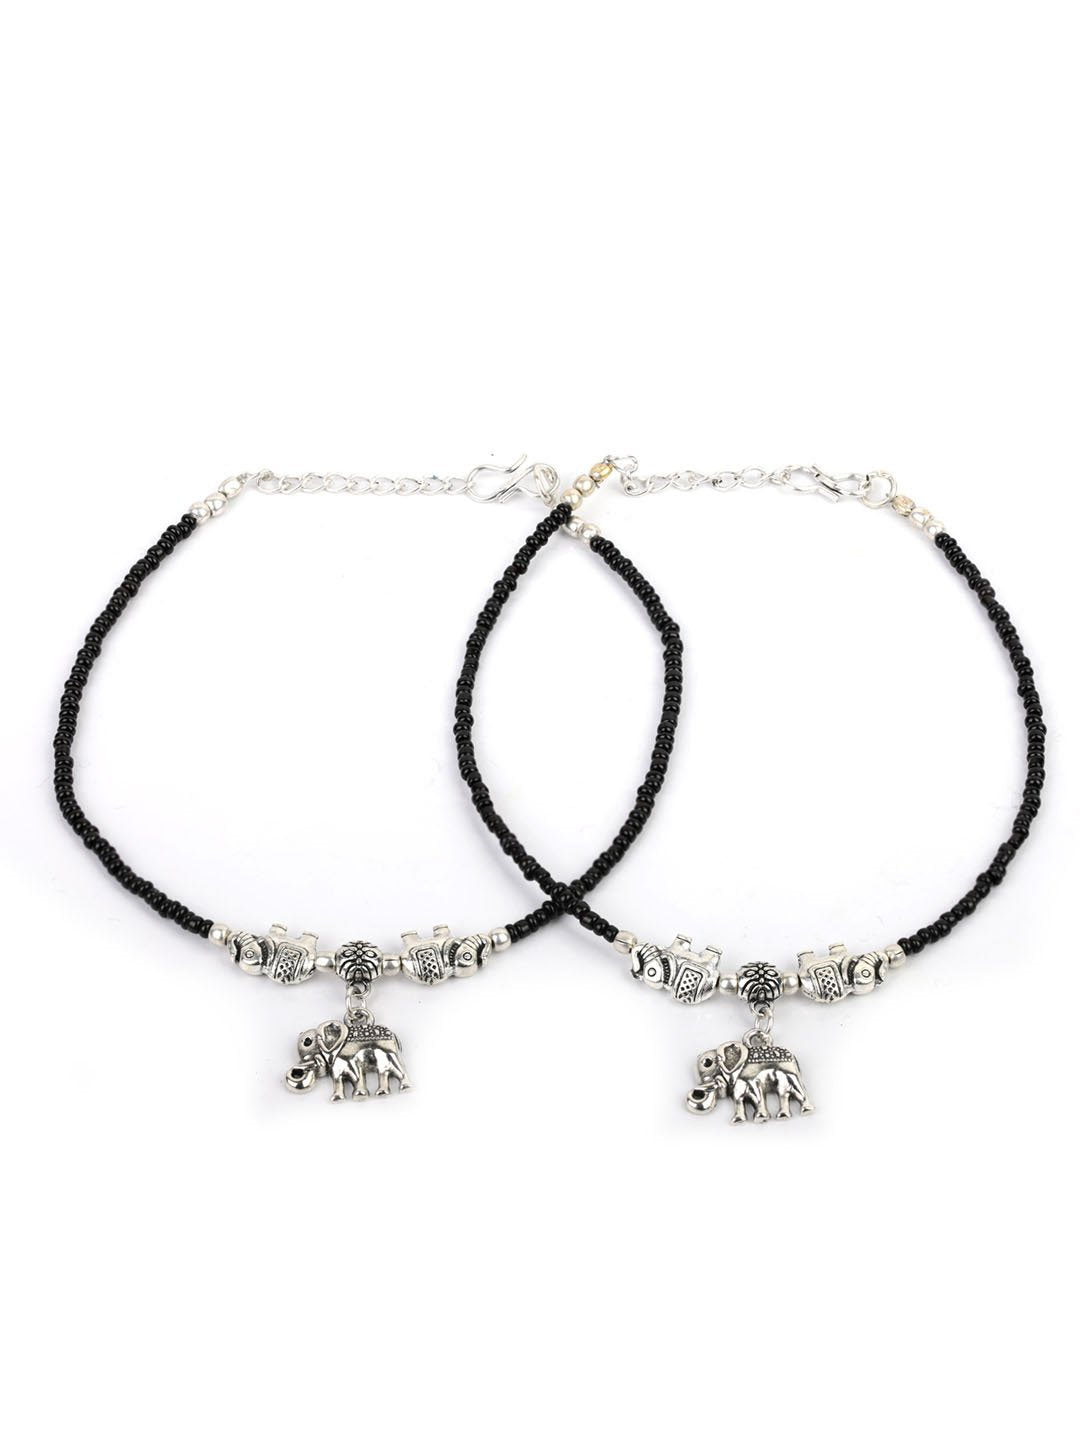 Women's  Black Beads Silver Plated Elephant Traditional Anklets - Priyaasi